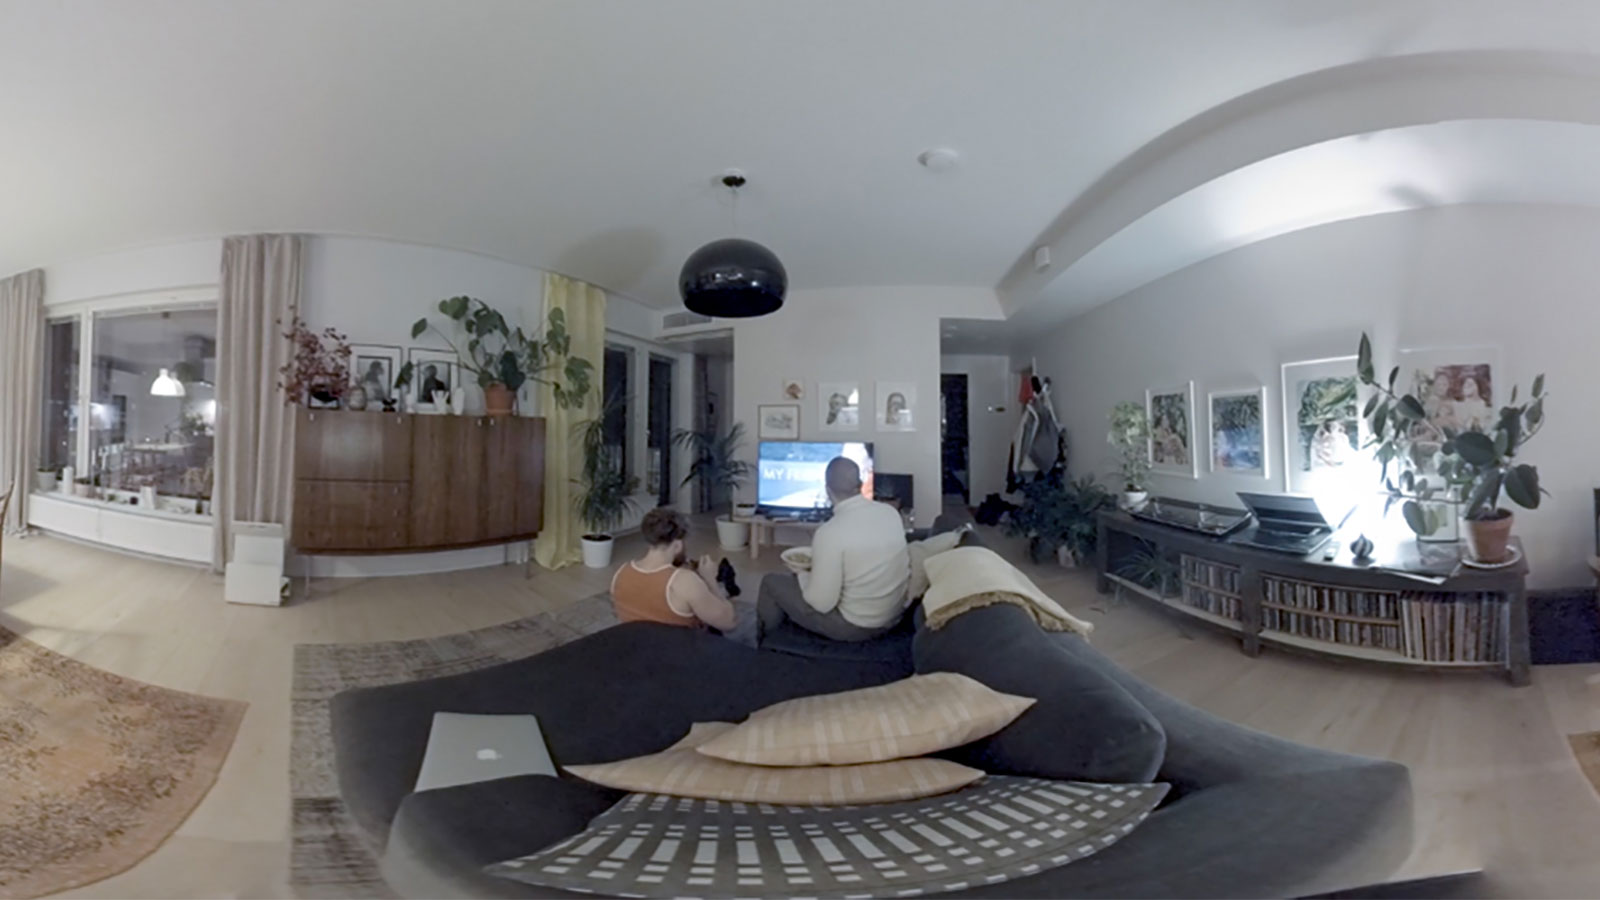 A screenshot from a 360 degree documentary project made by XR Hub team 361. Somebody's living room with two people sitting on the couch and watching tv.